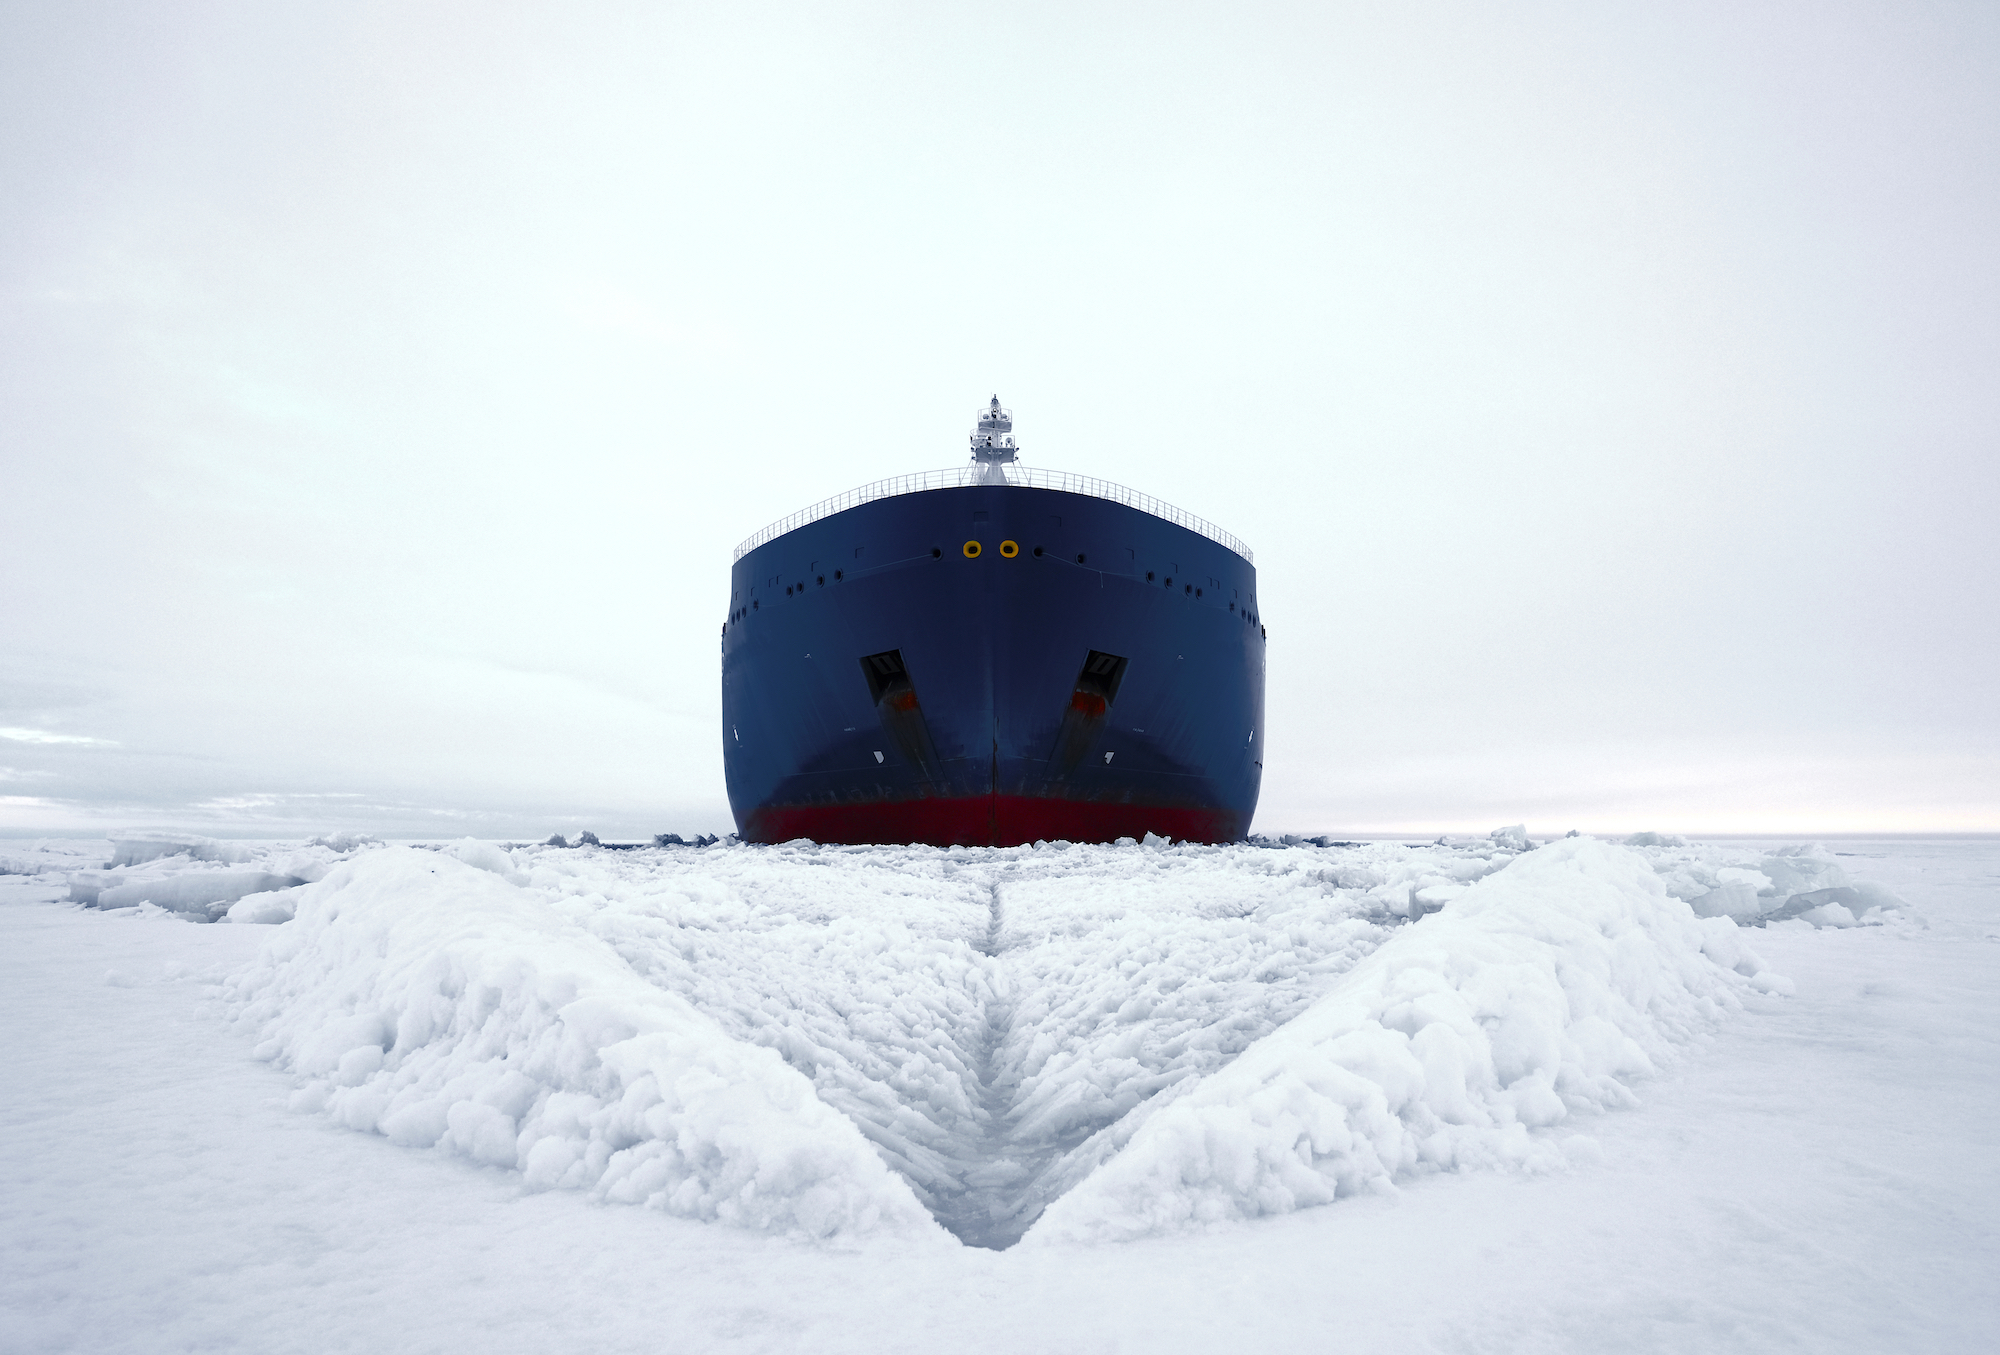 A ship on iced waters